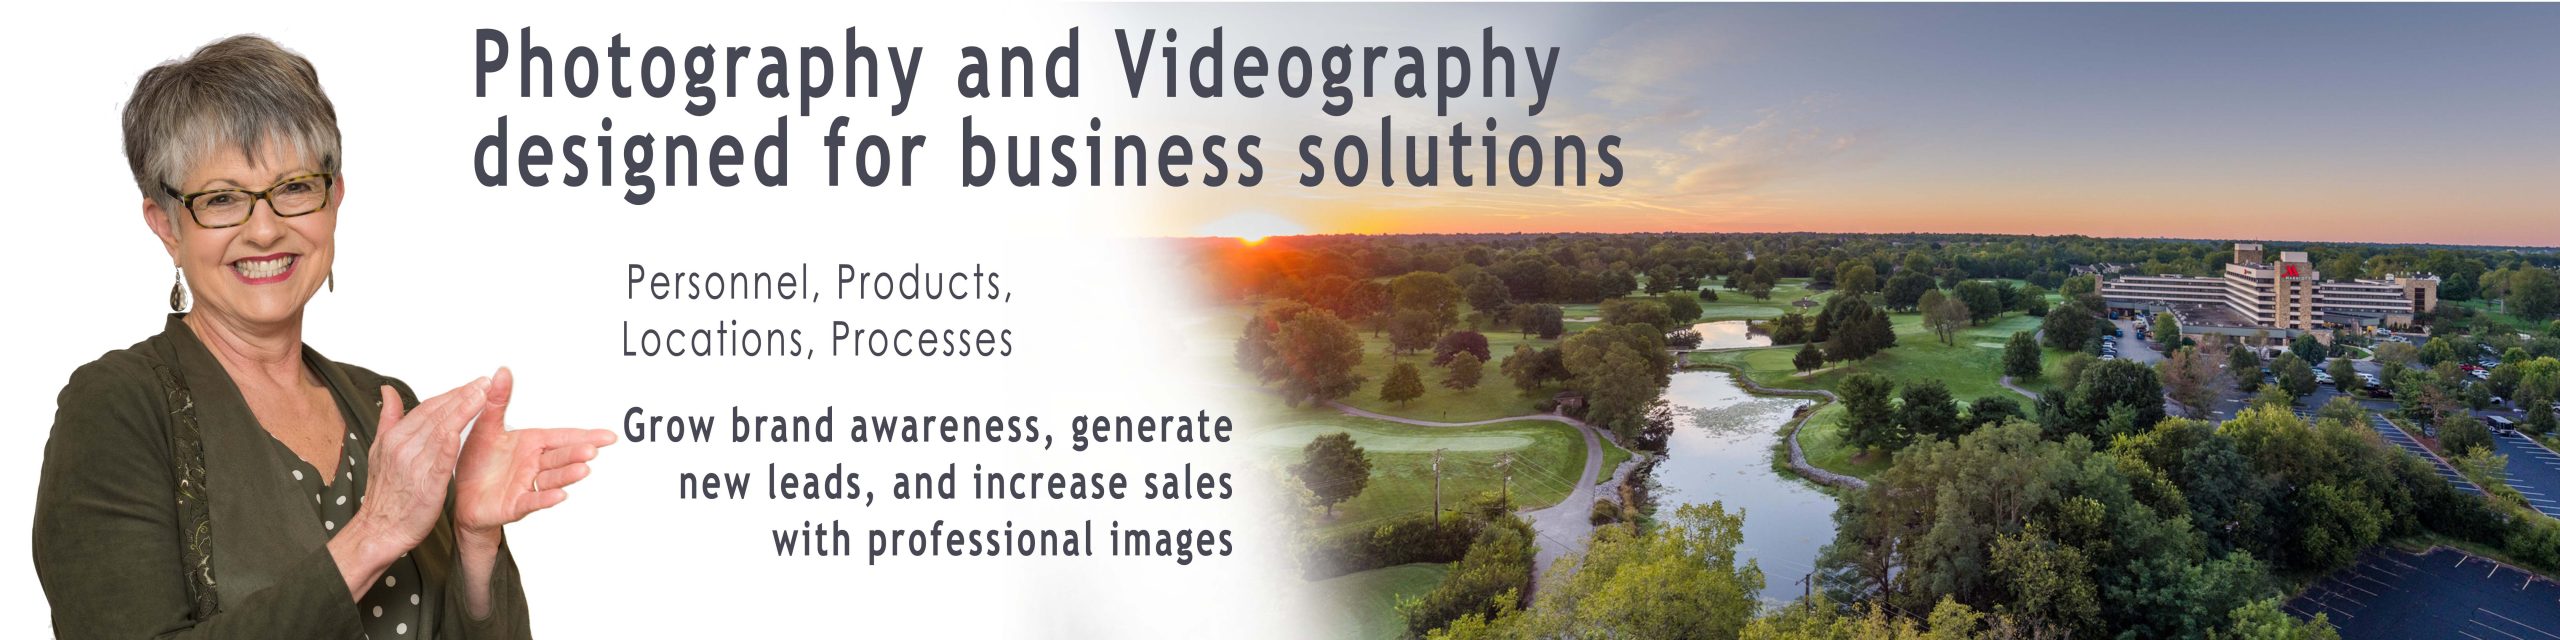 Photography and Videography for Businesses